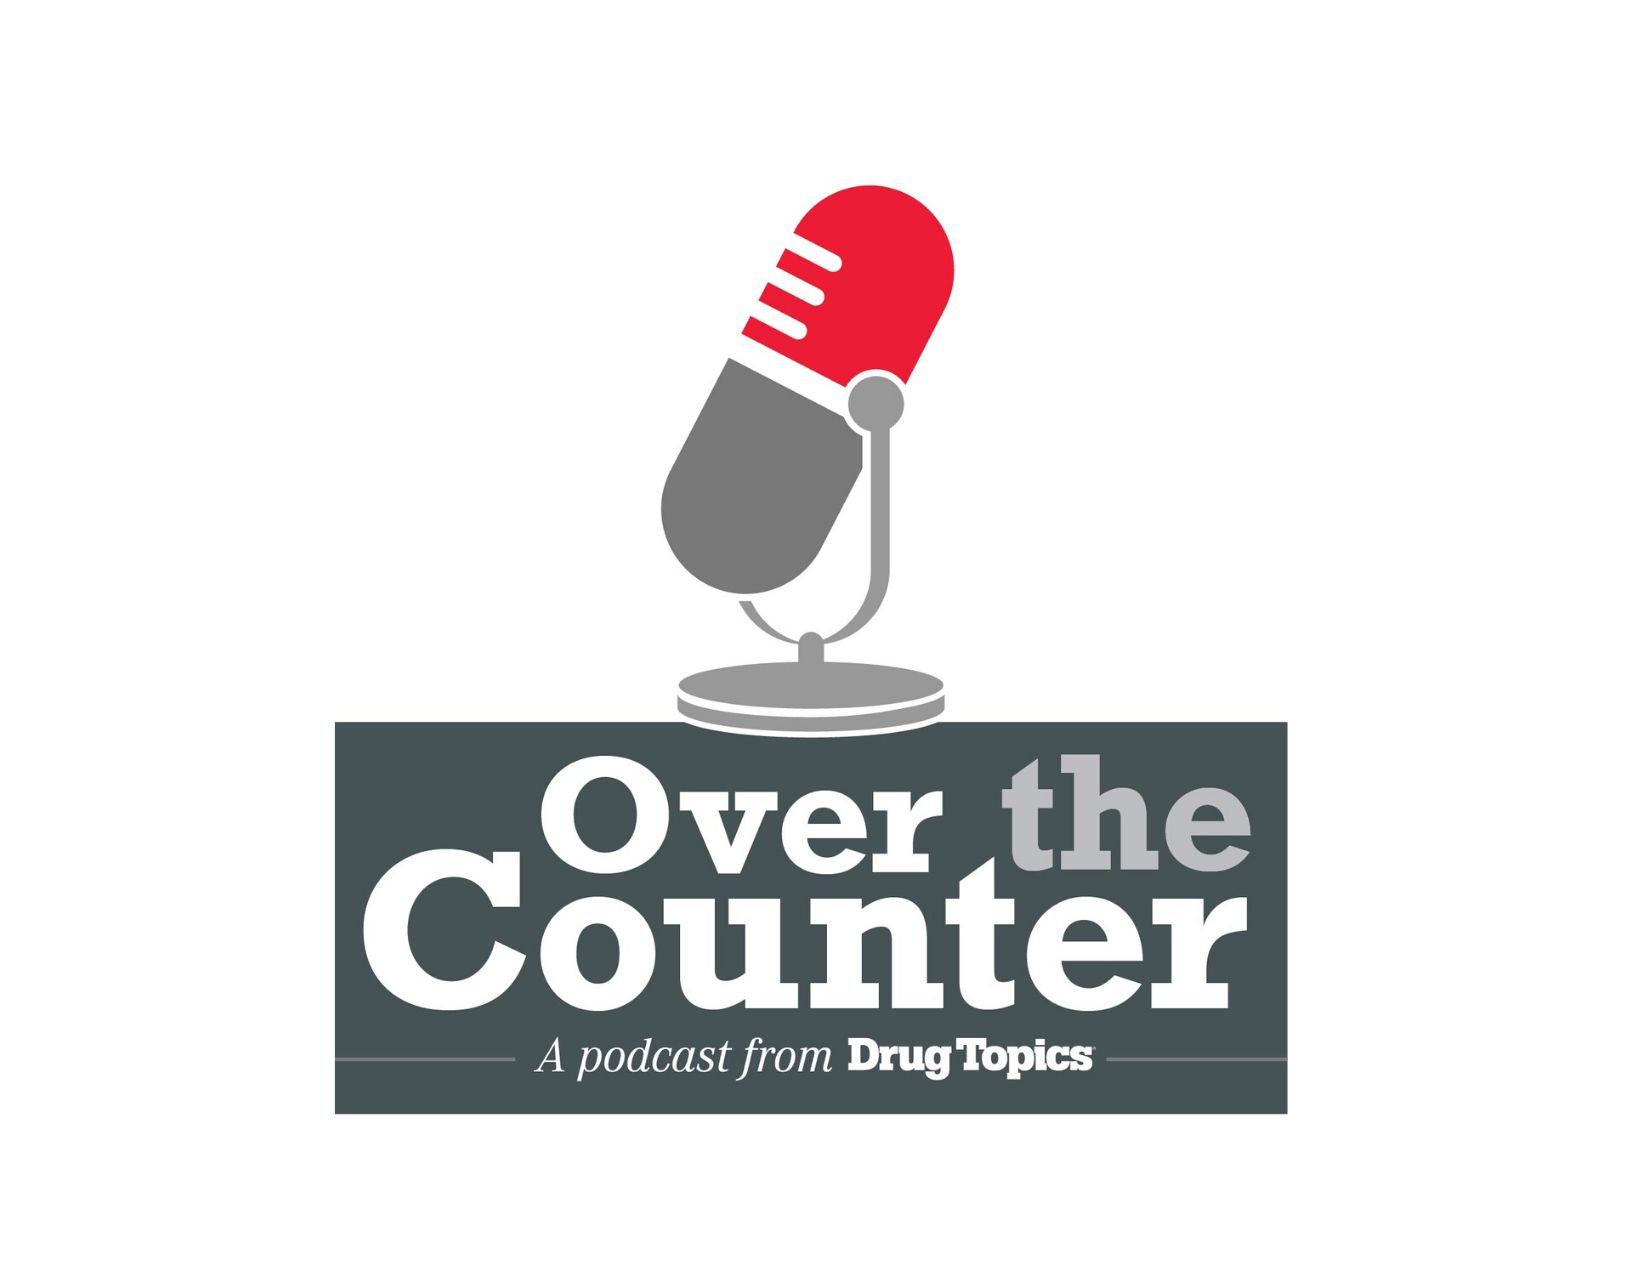 Over the Counter, the podcast from Drug Topics